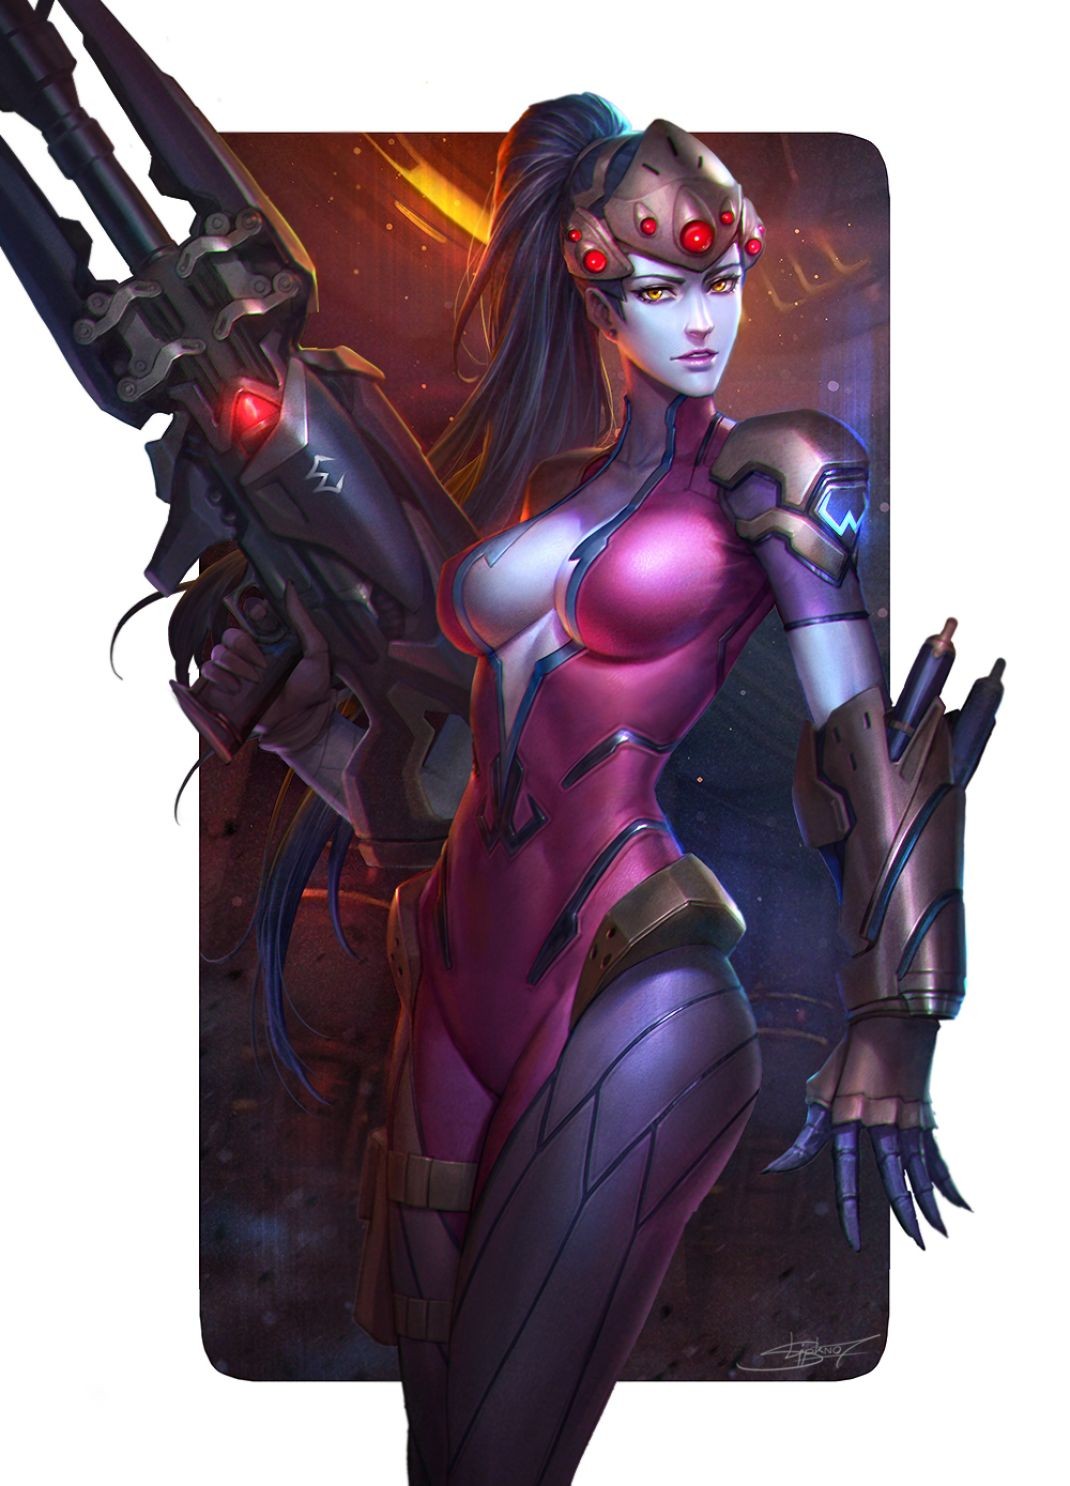 General 1070x1486 Blizzard Entertainment Affiliation: Talon Widowmaker (Overwatch) boobs weapon science fiction PC gaming video game art video game girls